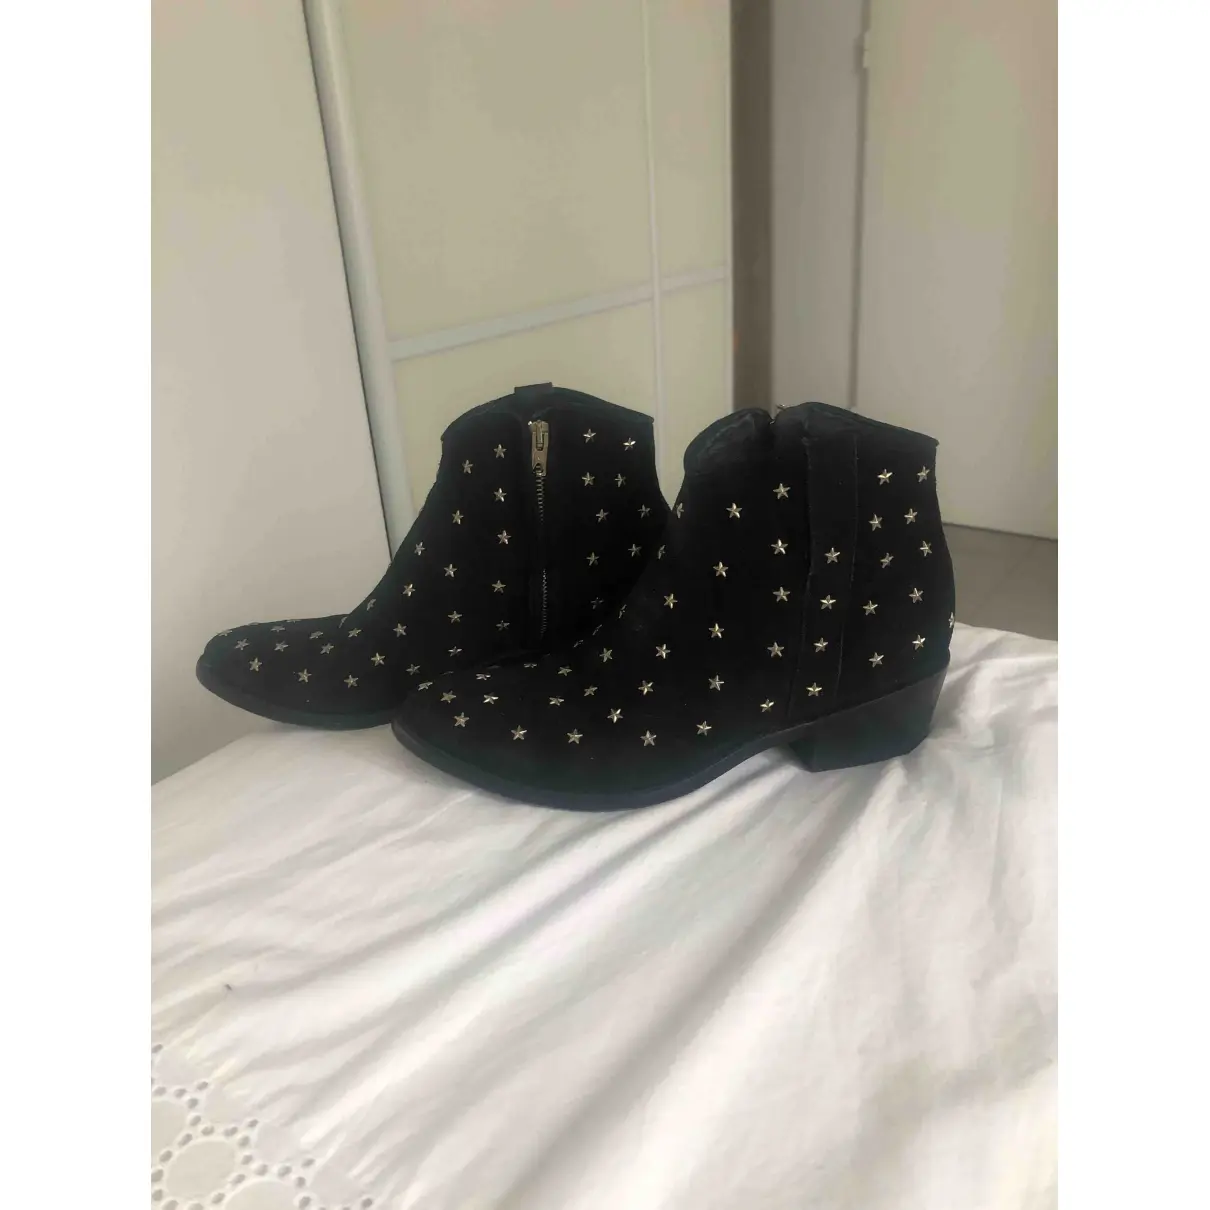 Buy Mexicana Western boots online